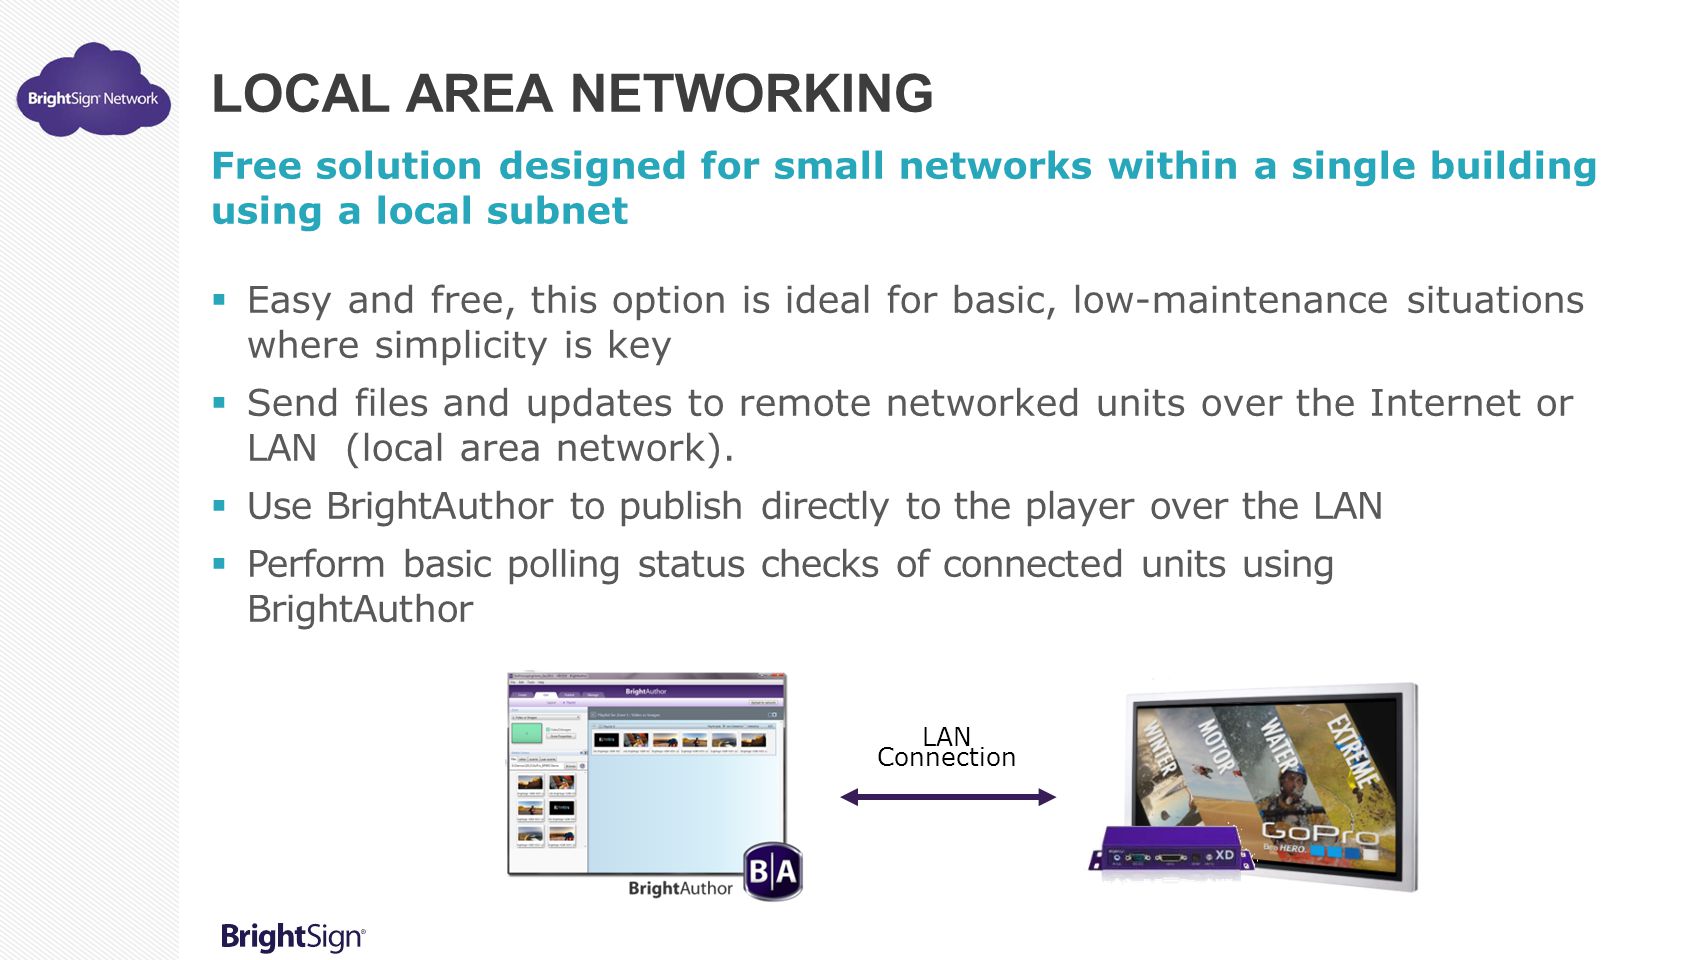 Local Area Networking Free solution designed for small networks within a single building using a local subnet.